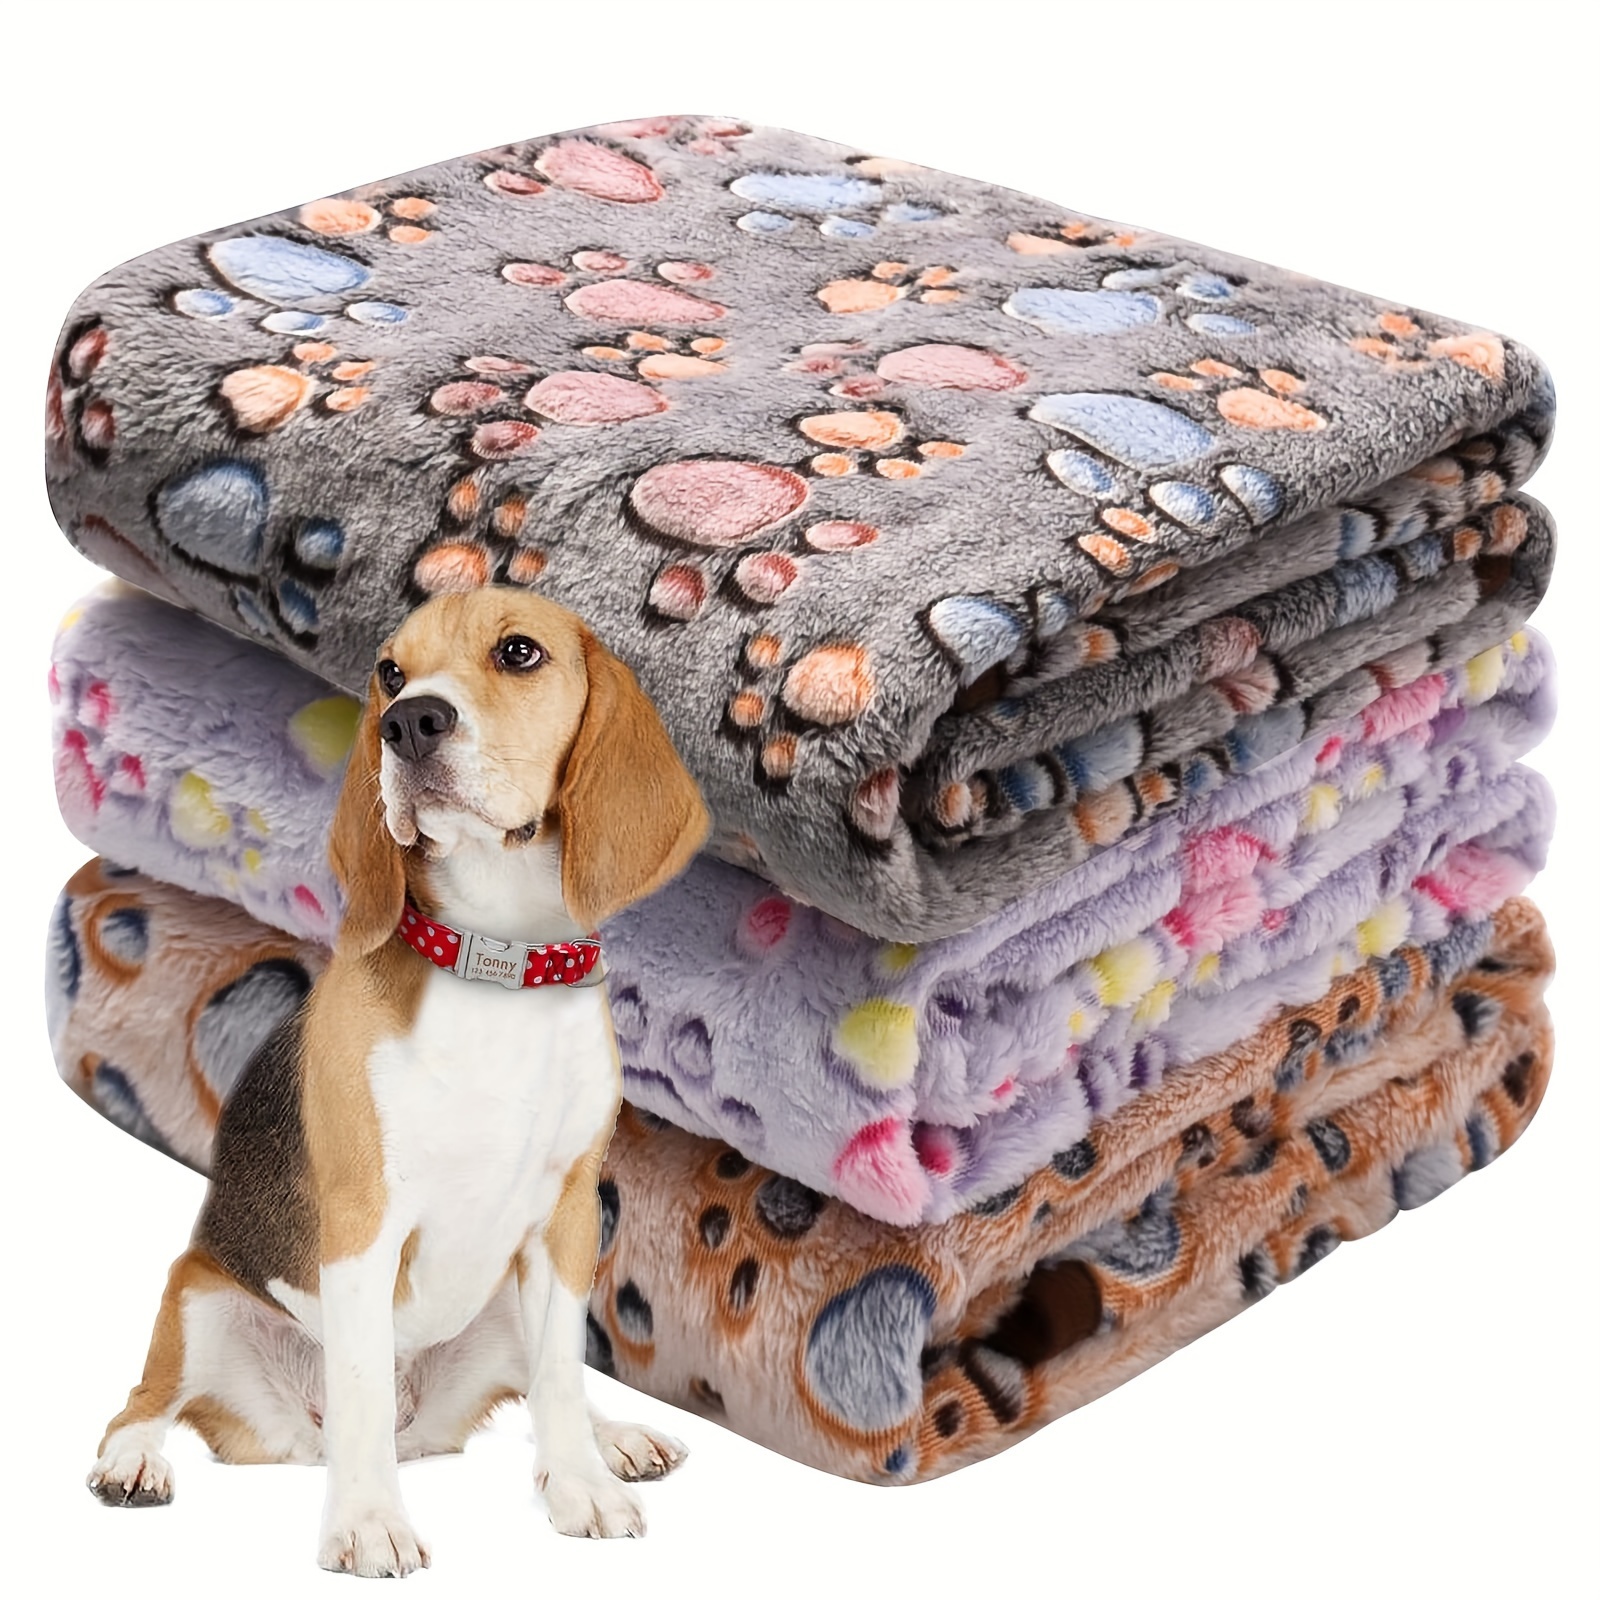 

3pcs Pet Blankets For Dogs And Cats, Coral Fleece And Flannel, With Paw Prints, Suitable For All Seasons